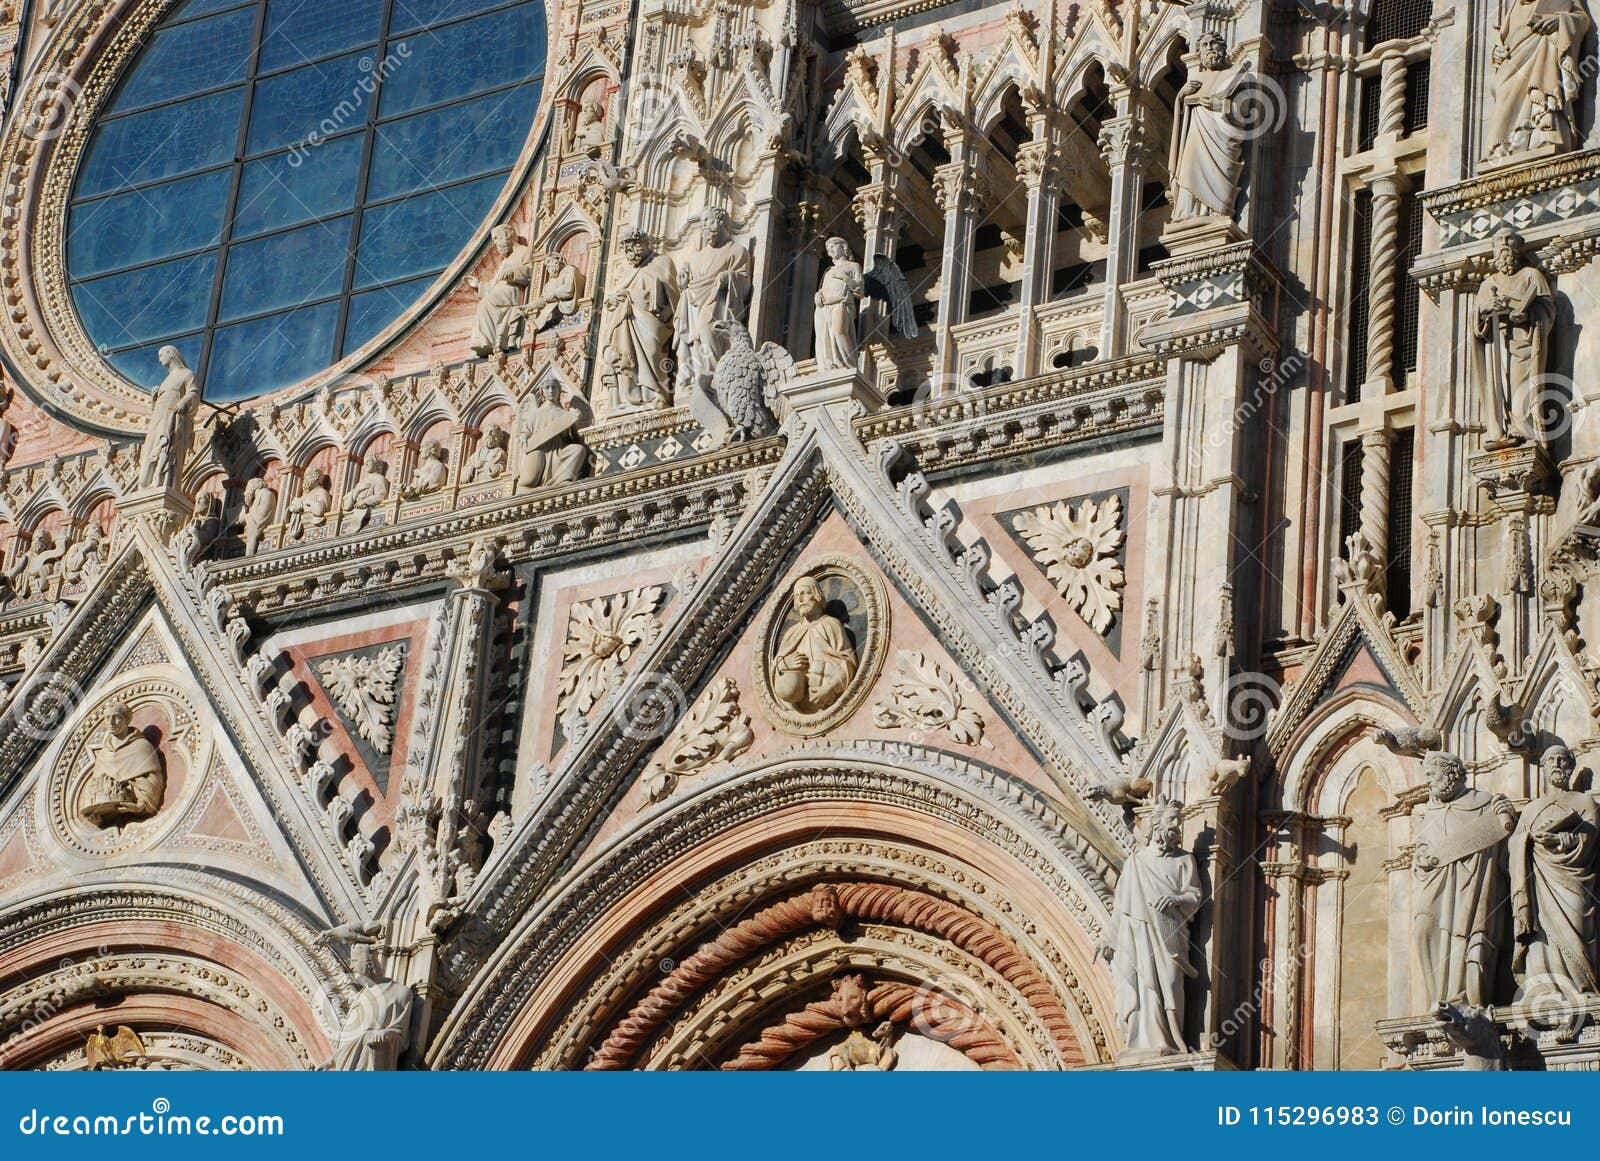 Siena Cathedral Building Landmark Cathedral Architecture Stock